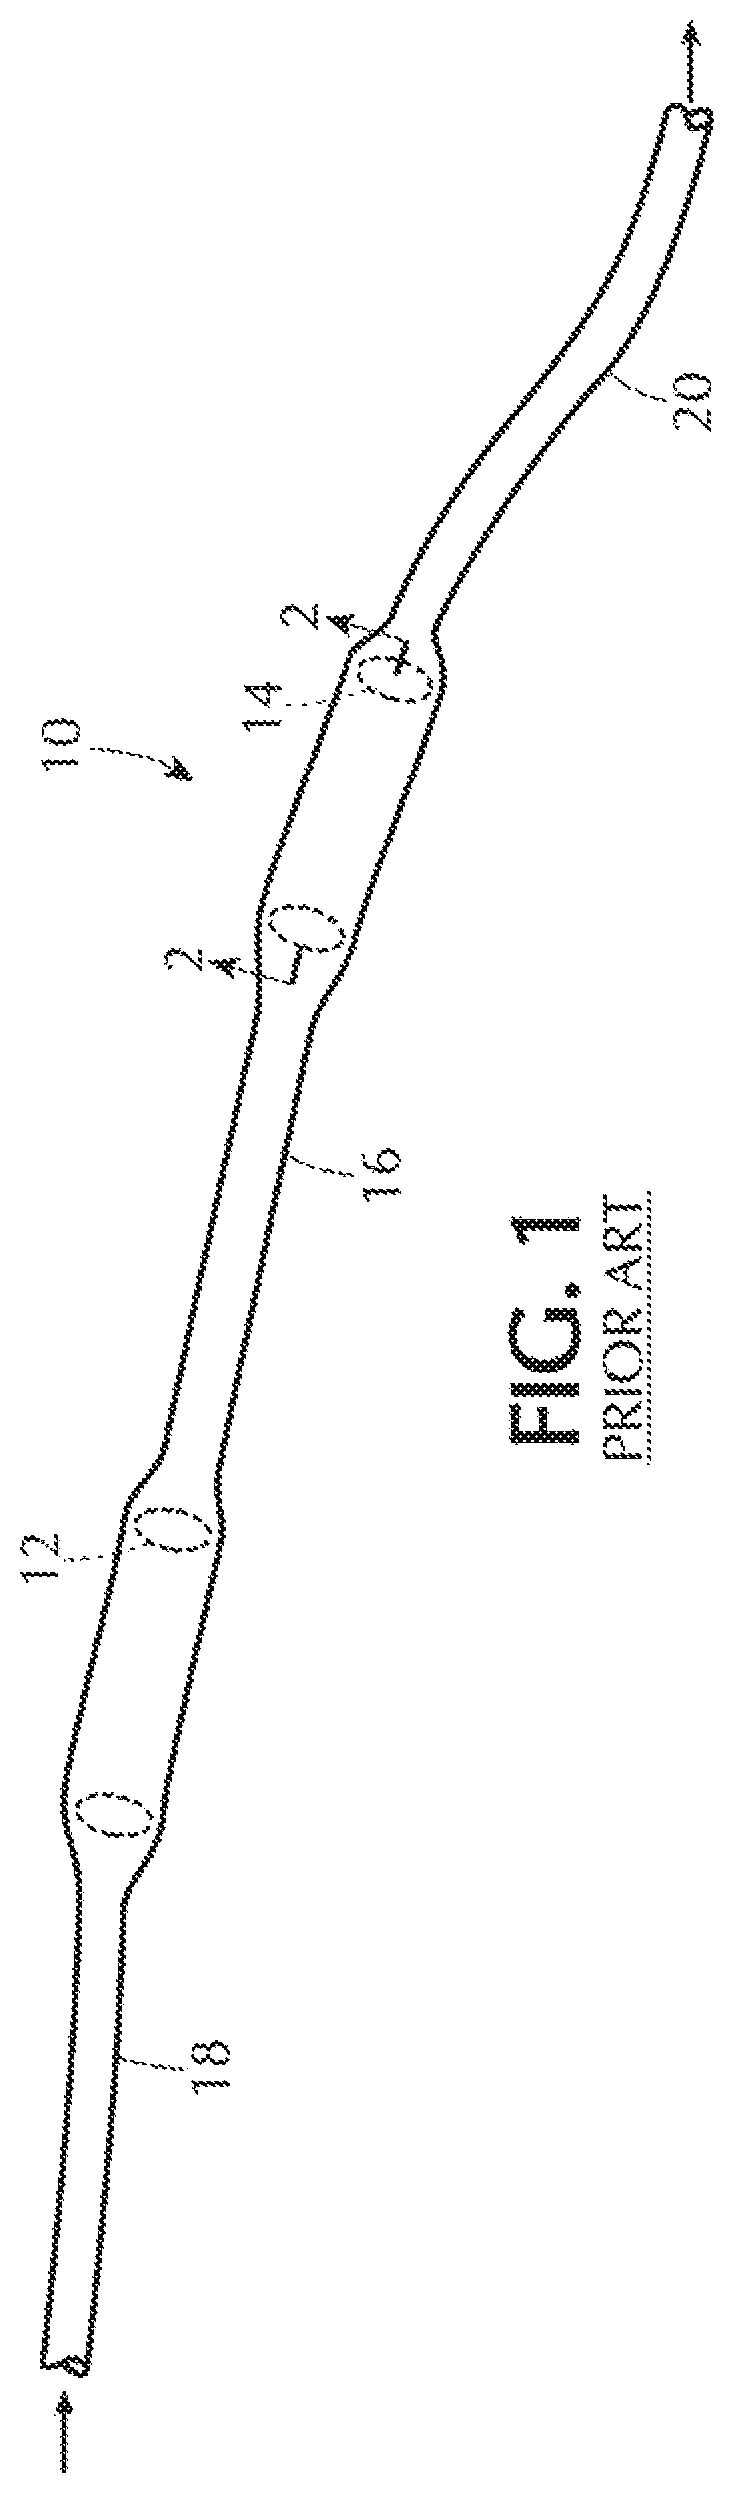 Self-offsetting implantable catheter system